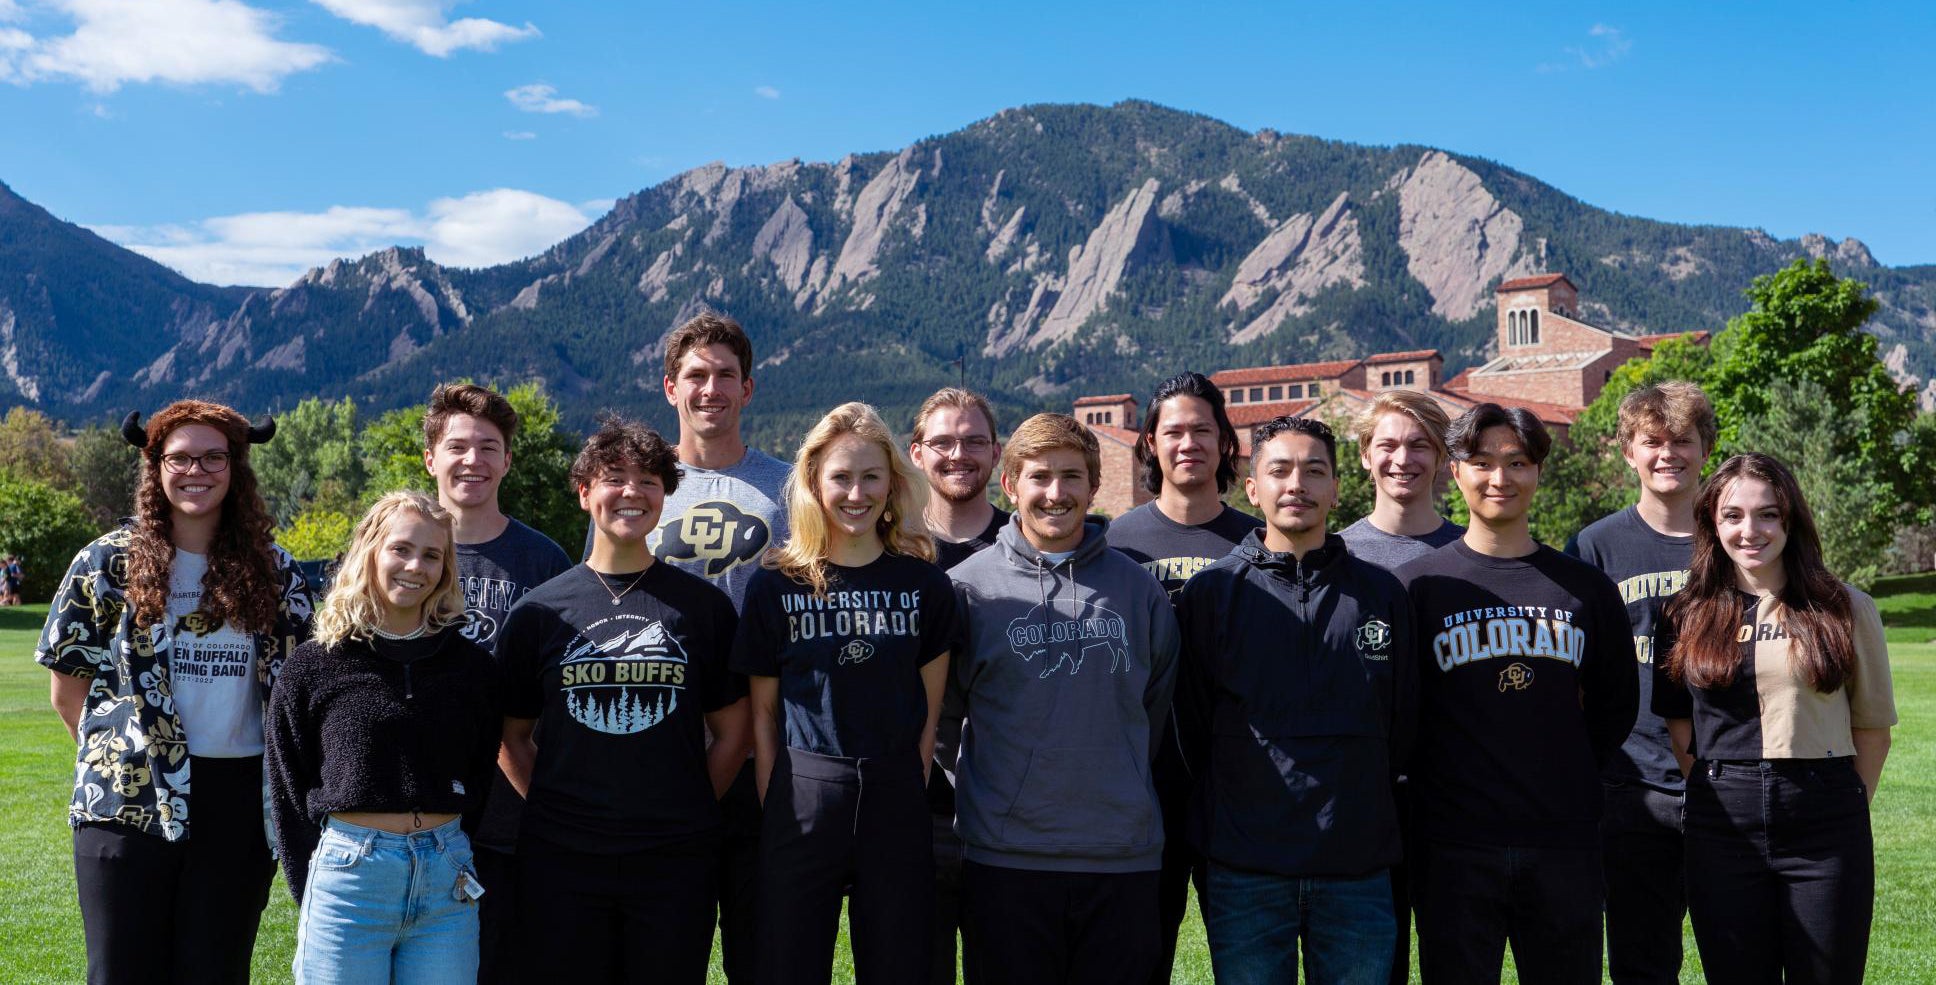 The Wind Team poses for a group photo on the Business Field, with the Flatirons in the background